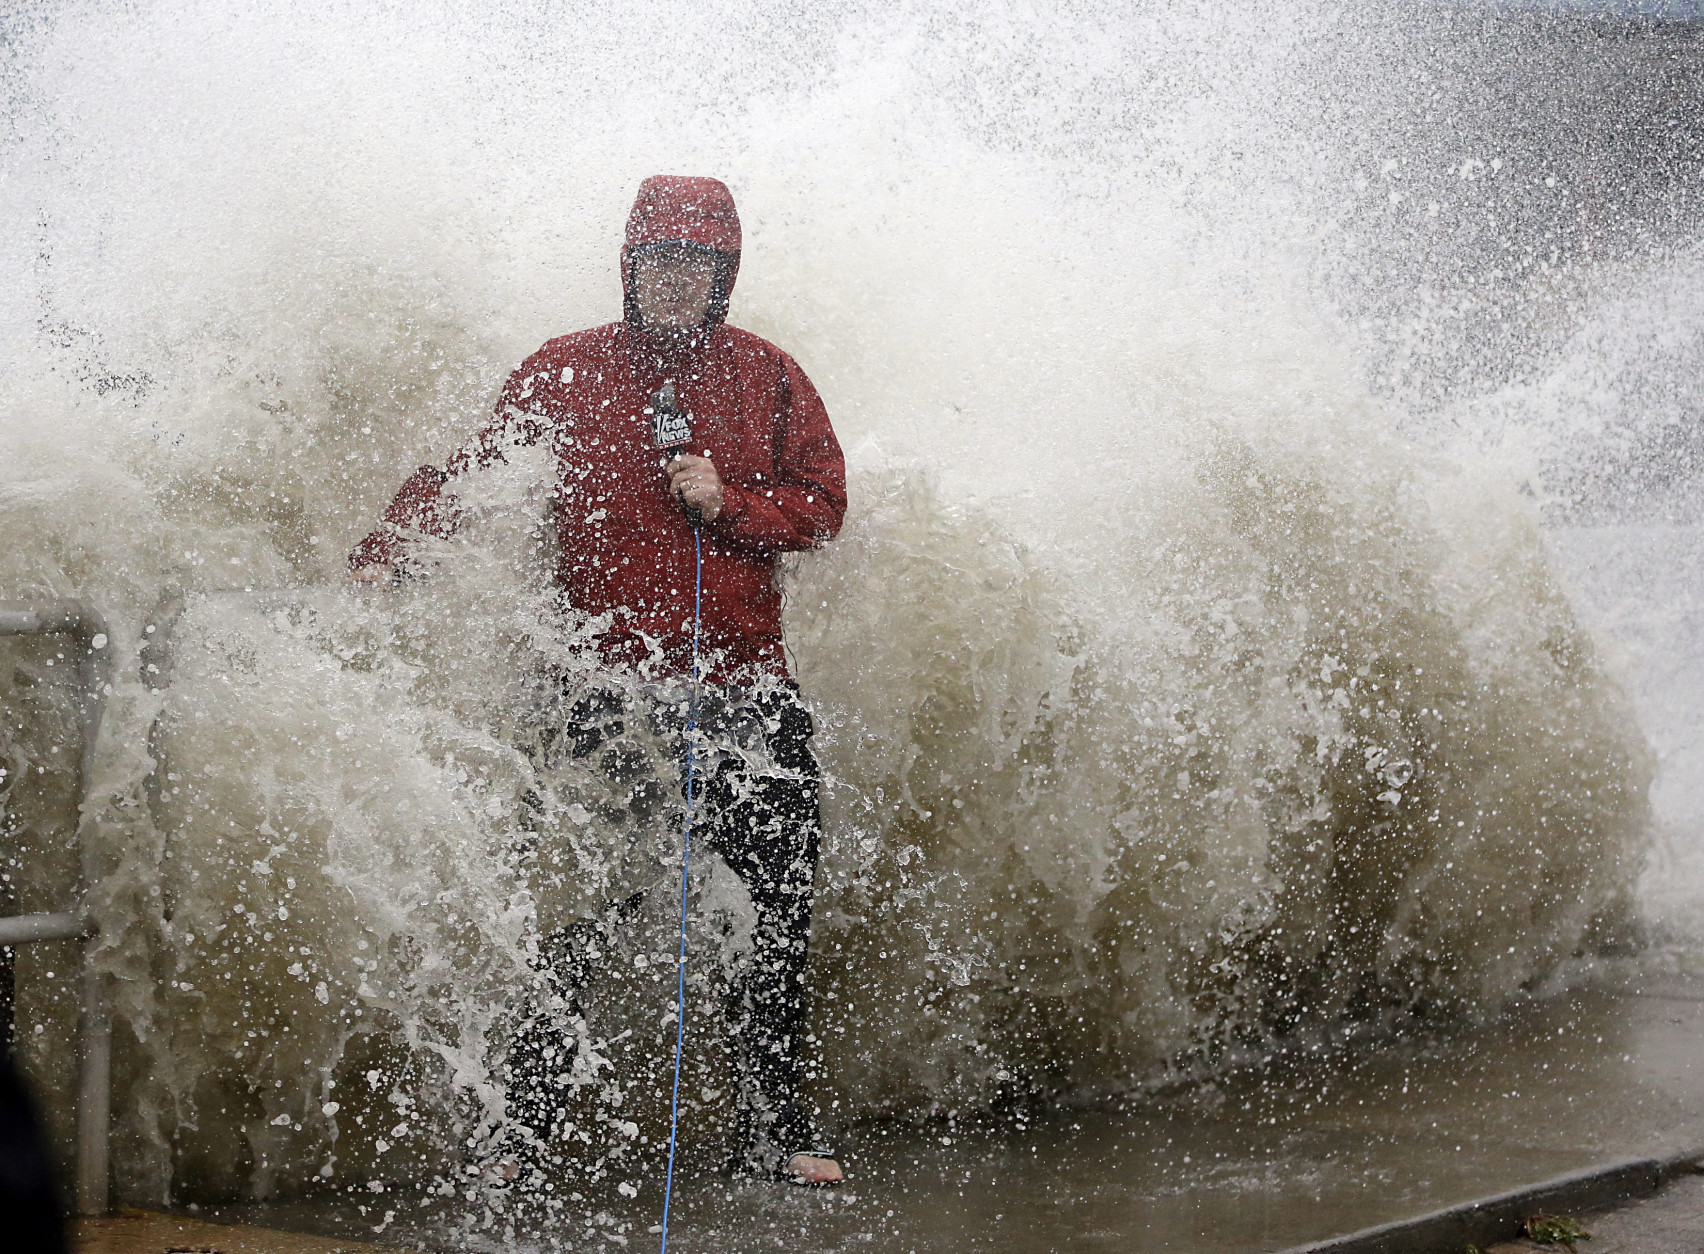 A news reporter doing a stand up near a sea wall in Cedar Key, Fla., is covered by an unexpected wave as Hurricane Hermine nears the Florida coast, Thursday, Sept. 1, 2016. Hurricane Hermine gained new strength Thursday evening and roared ever closer to Florida's Gulf Coast, where rough surf began smashing against docks and boathouses and people braced for the first direct hit on the state from a hurricane in over a decade. (AP Photo/John Raoux)